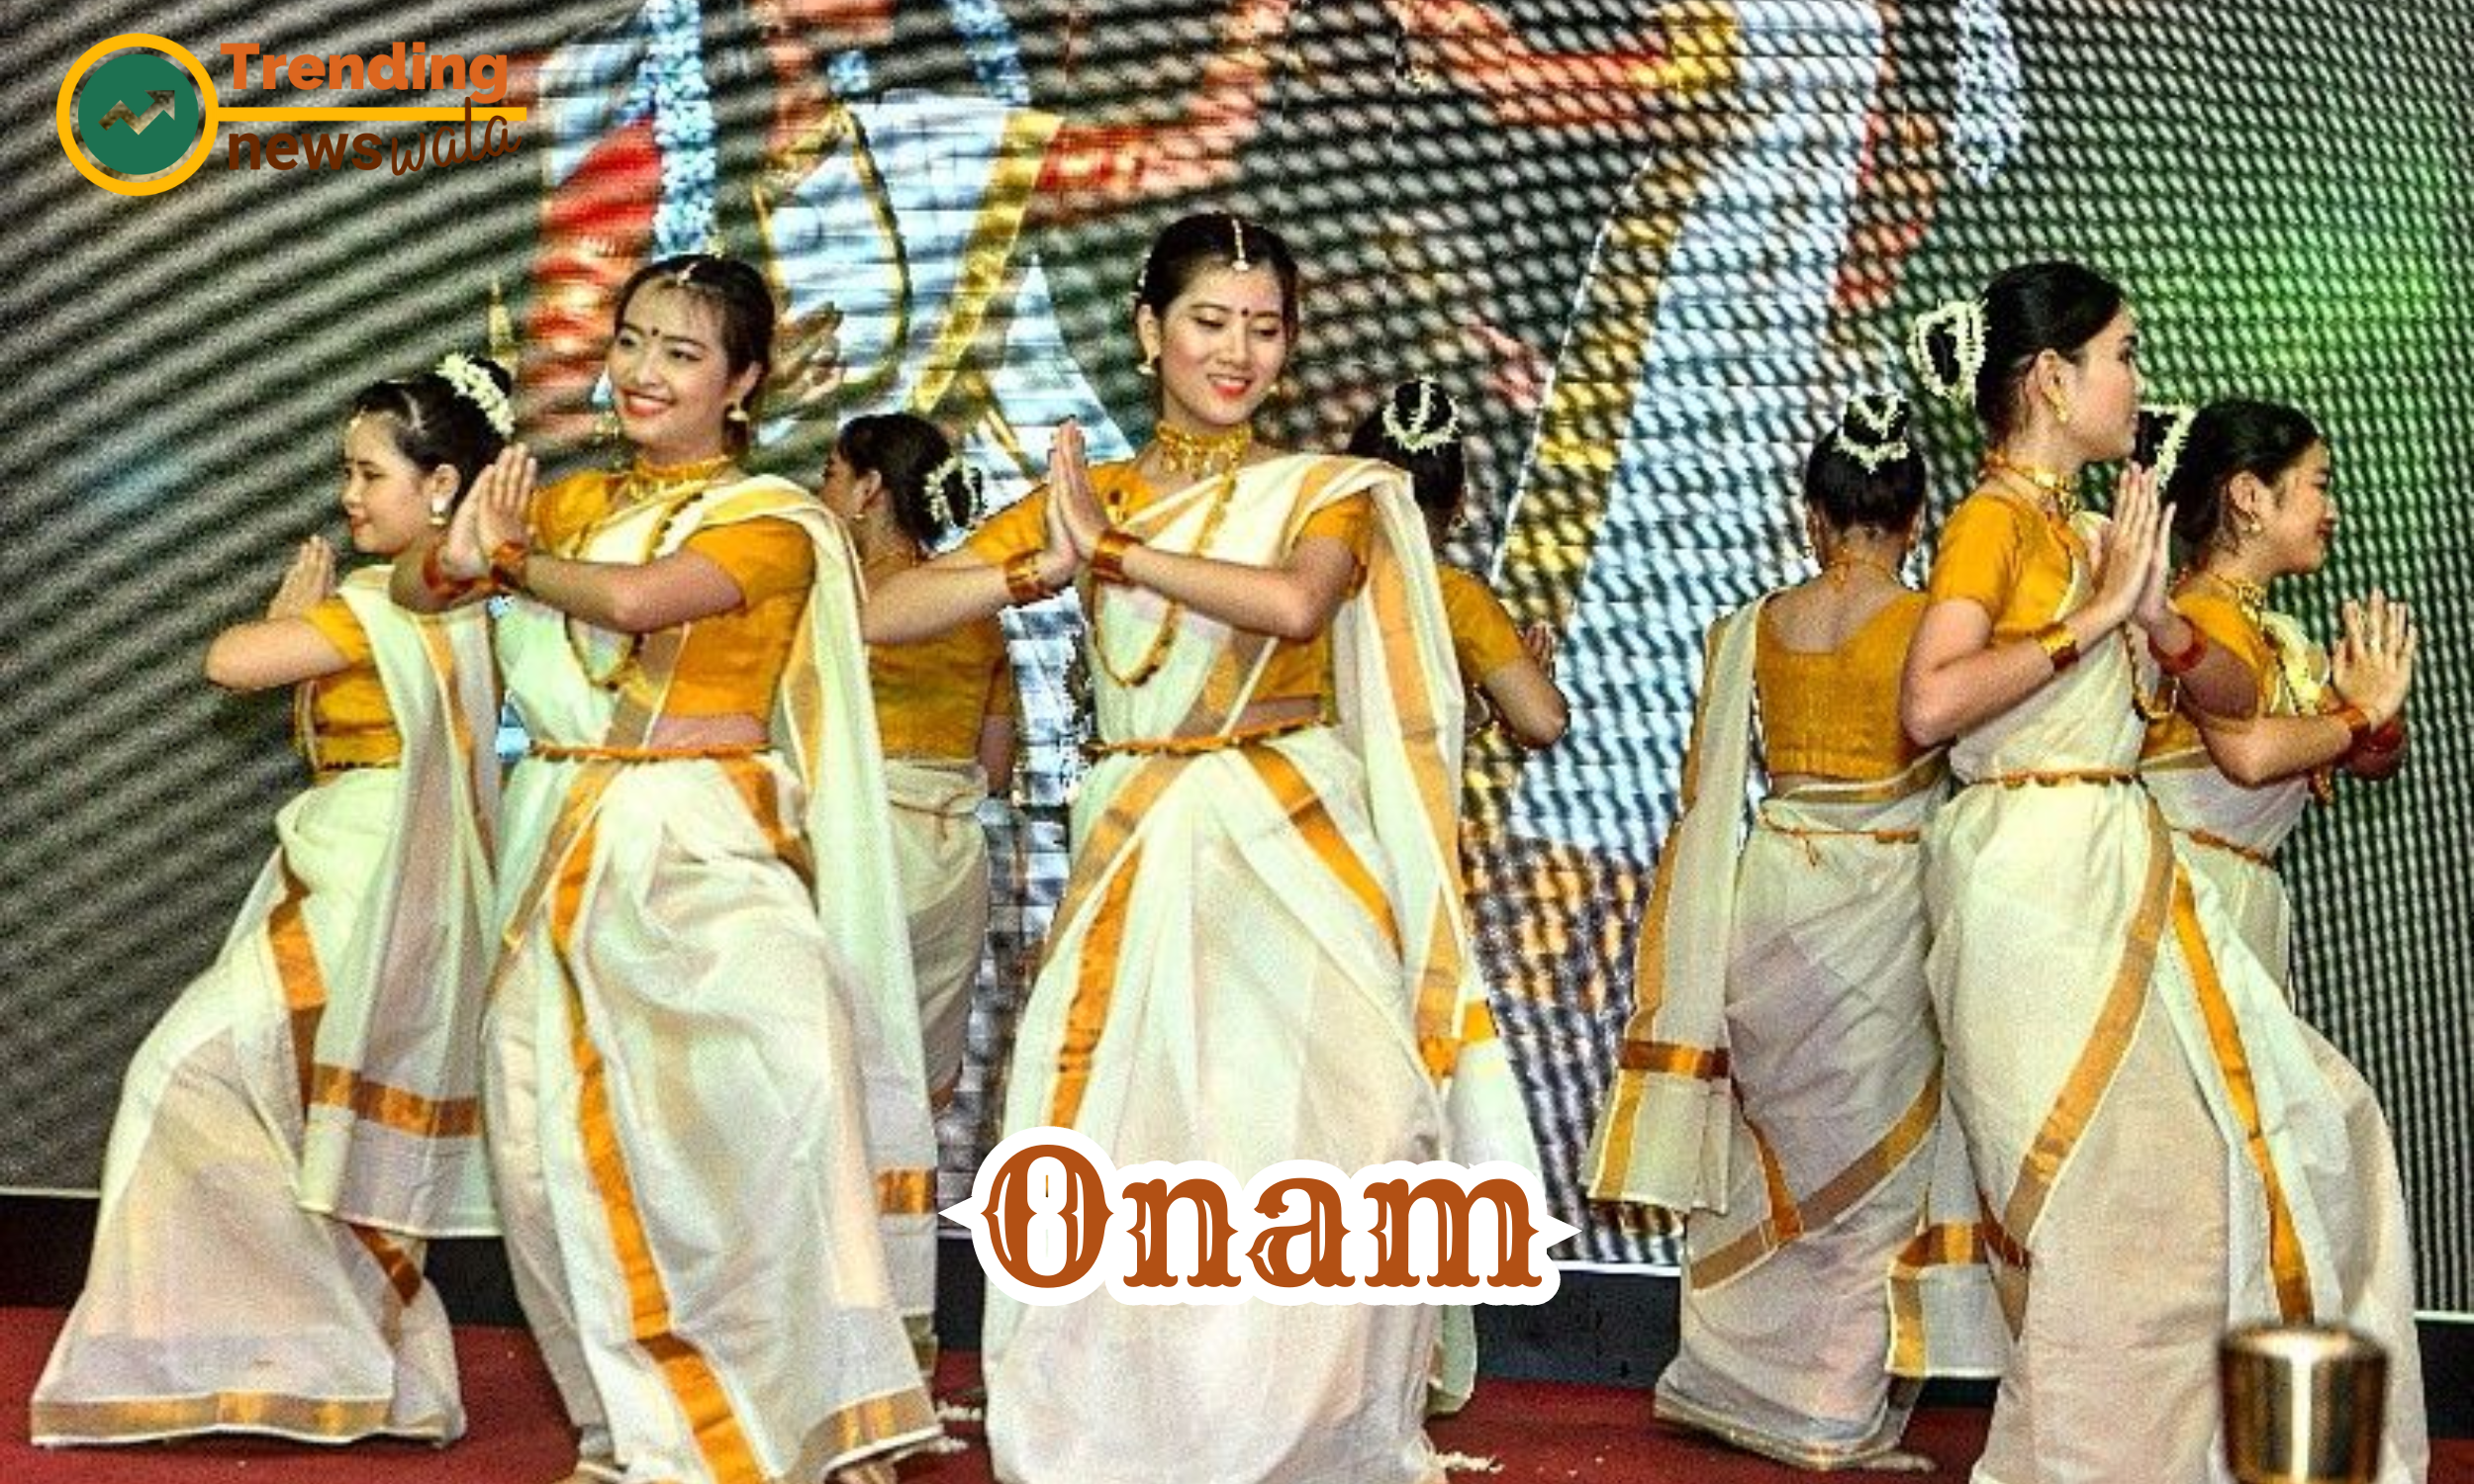 Thiruvathira Kali is a graceful Margamkali is a traditional group dance performed by women in Kerala